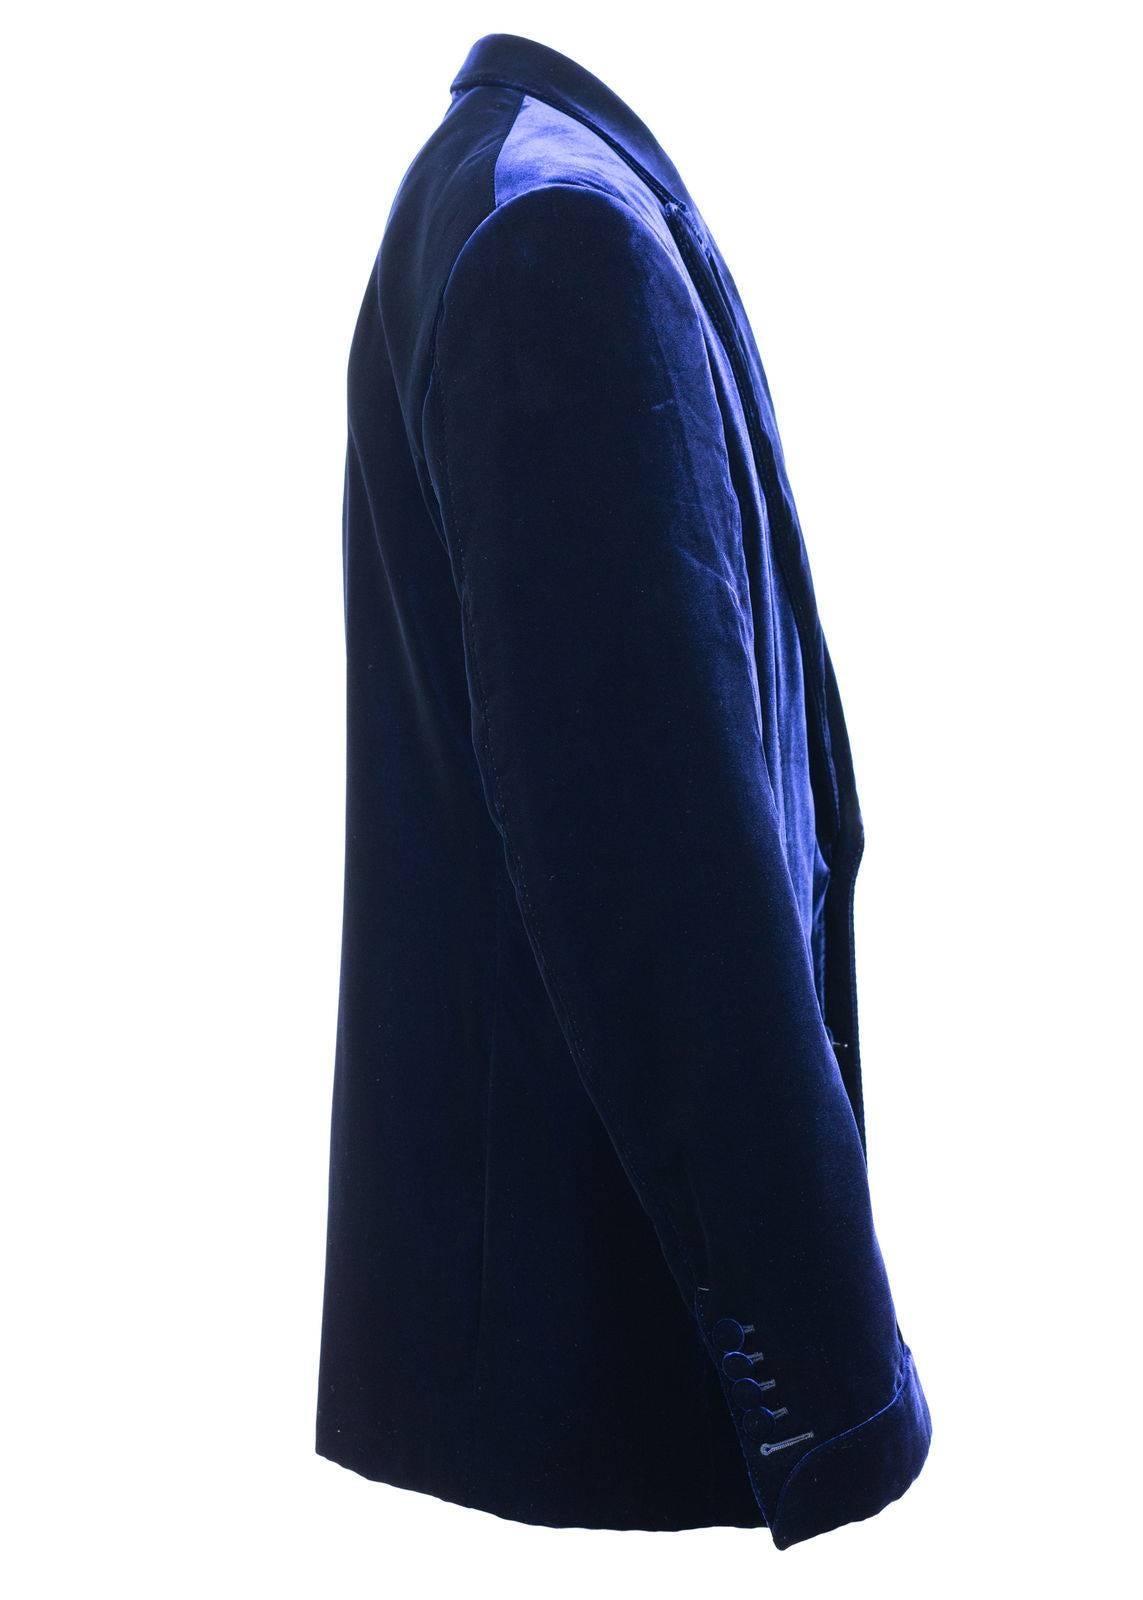 Invite all pleasurable eyes in with your Tom Ford Velvet Jacket. This strikingly smooth Shelton features a peak lapel, silk blended interior, and velvet buttoned jacket sleeves. You can pair this suave unit with and all blue ensemble for maximum